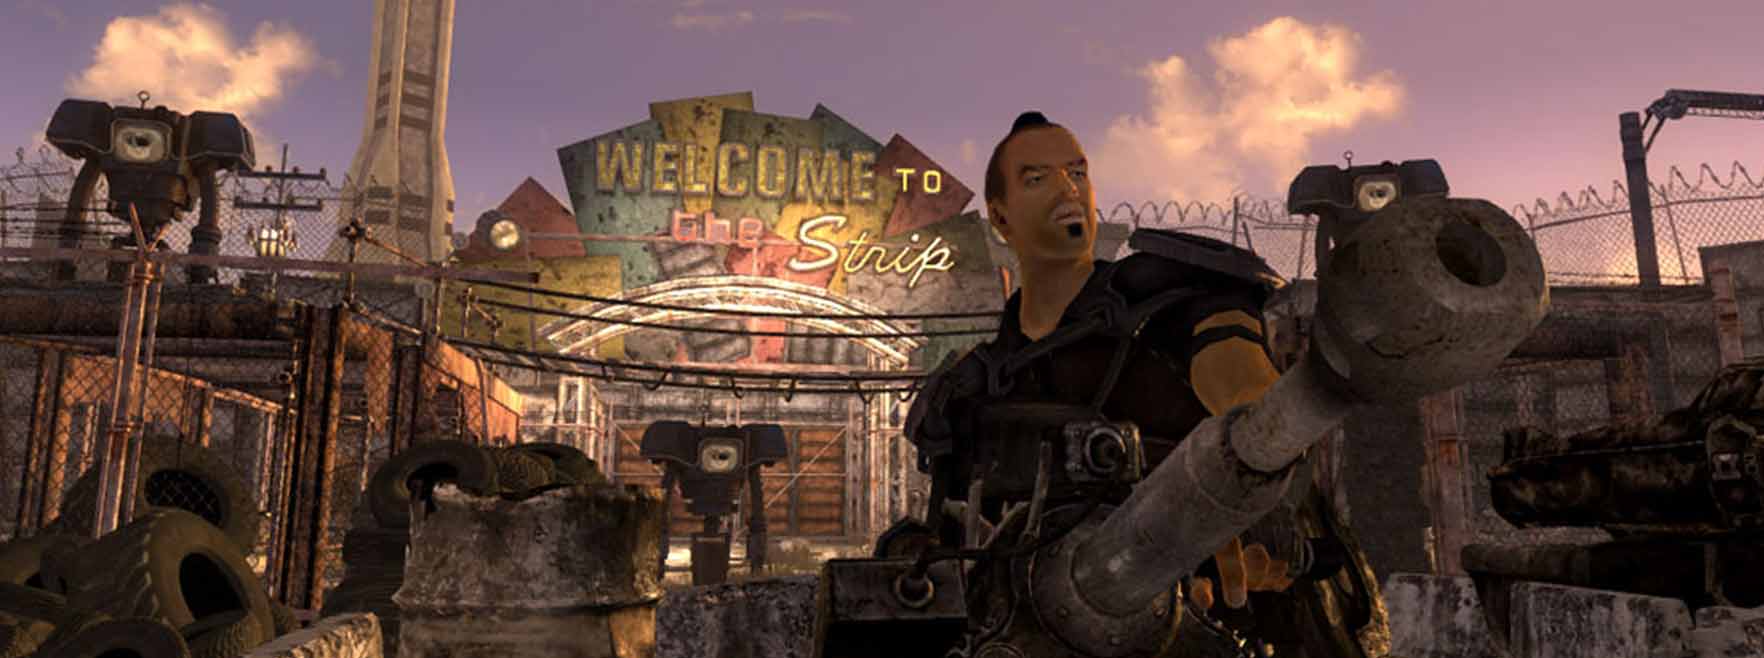 fallout new vegas images